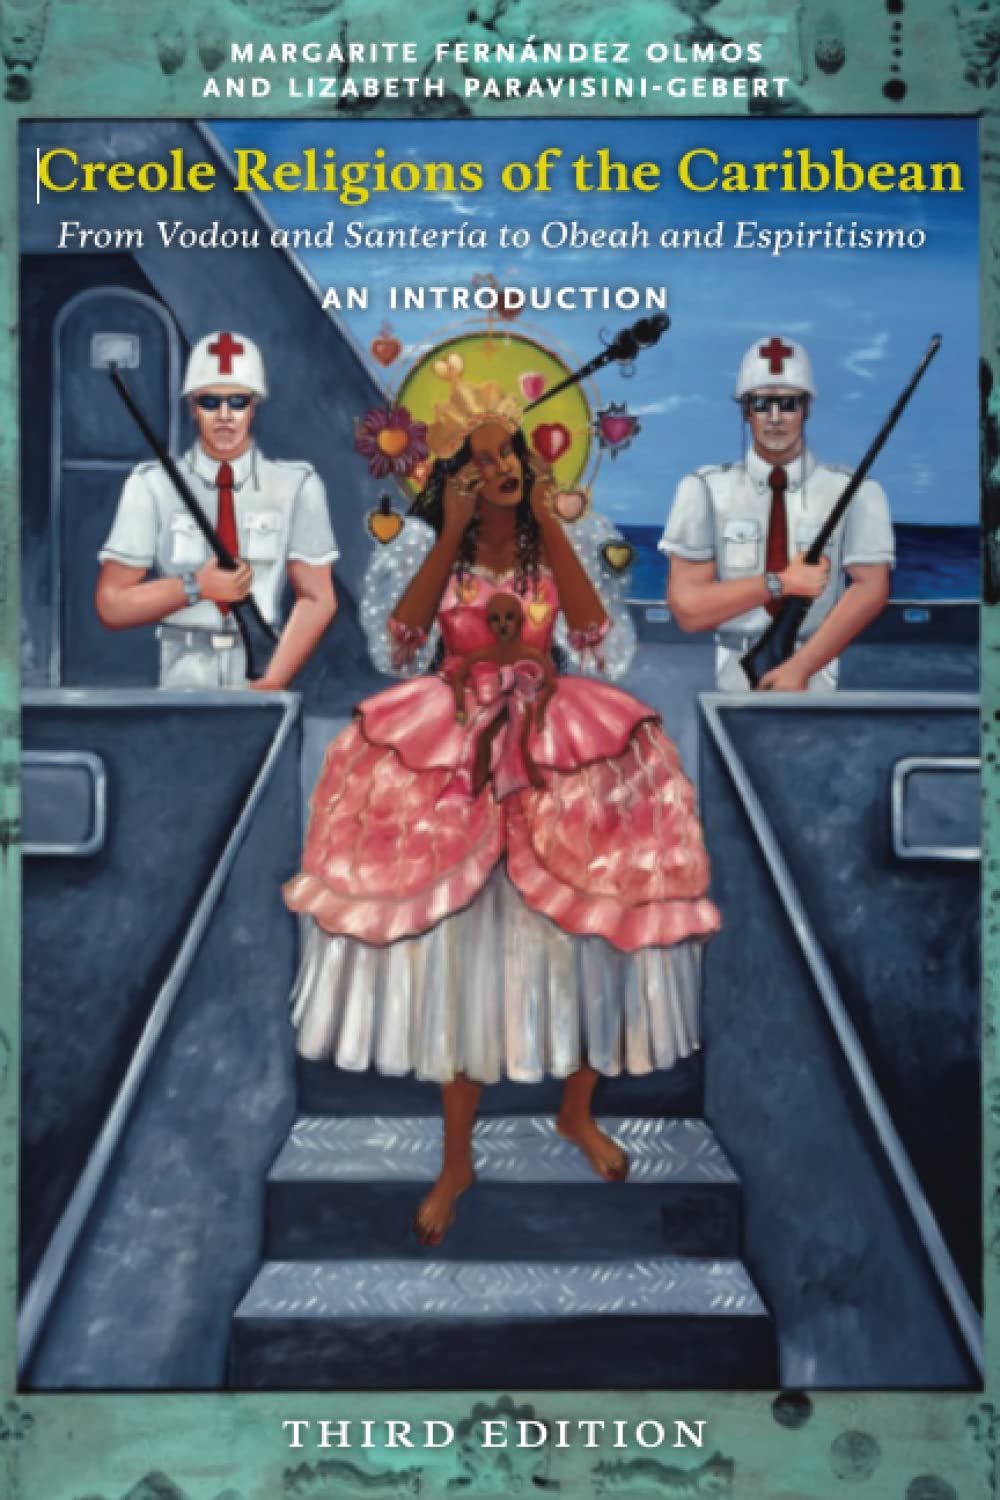 Creole Religions of the Caribbean: From Vodou and Santeria to Obeah and Espiritismo, Third Edition, by Fernández Olmos and Paravisini-Gebert